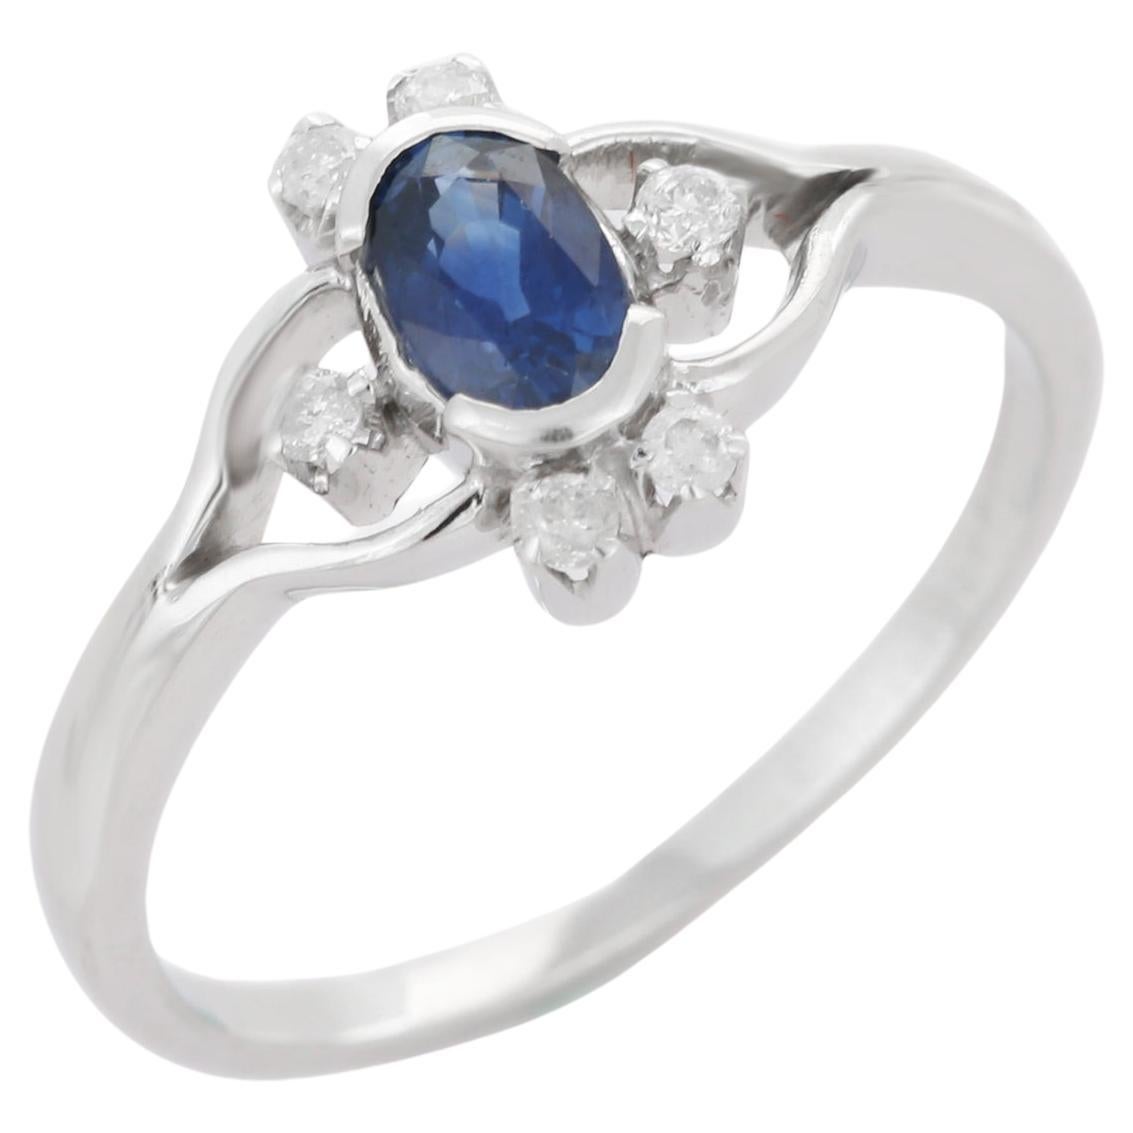 For Sale:  Solid 18k White Gold Vivid Oval Blue Sapphire and Diamond Wedding Ring